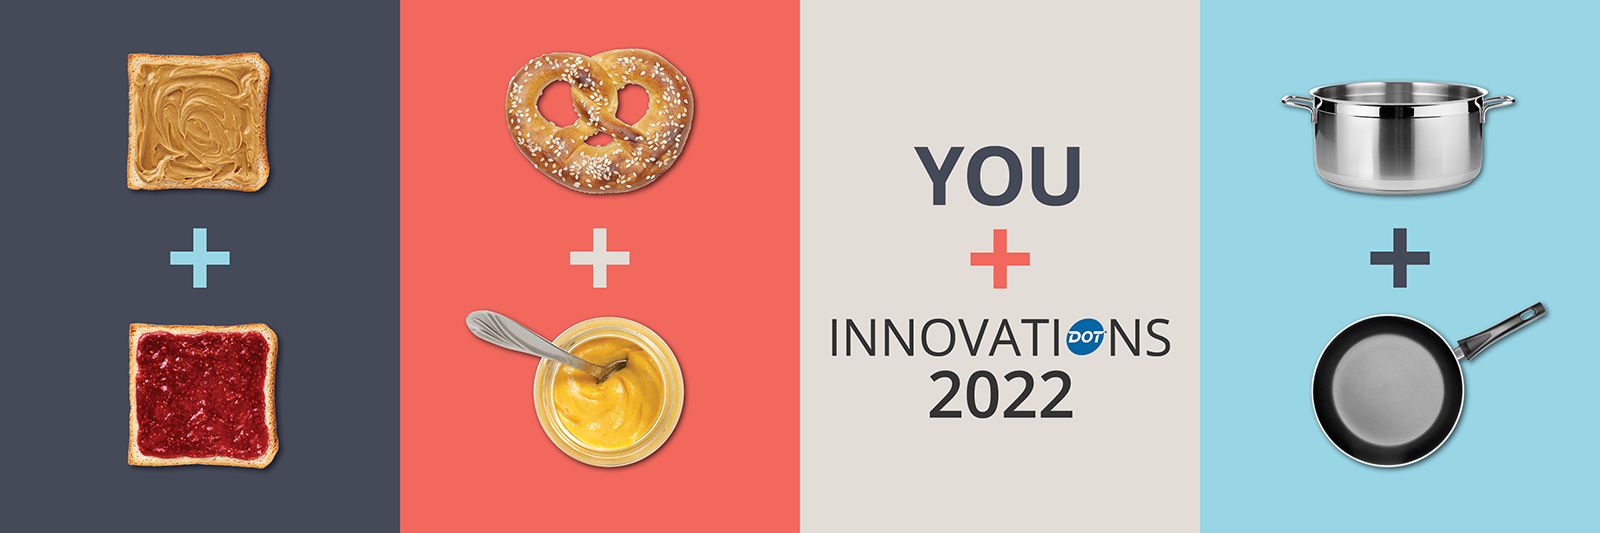 You + Innovations 2022